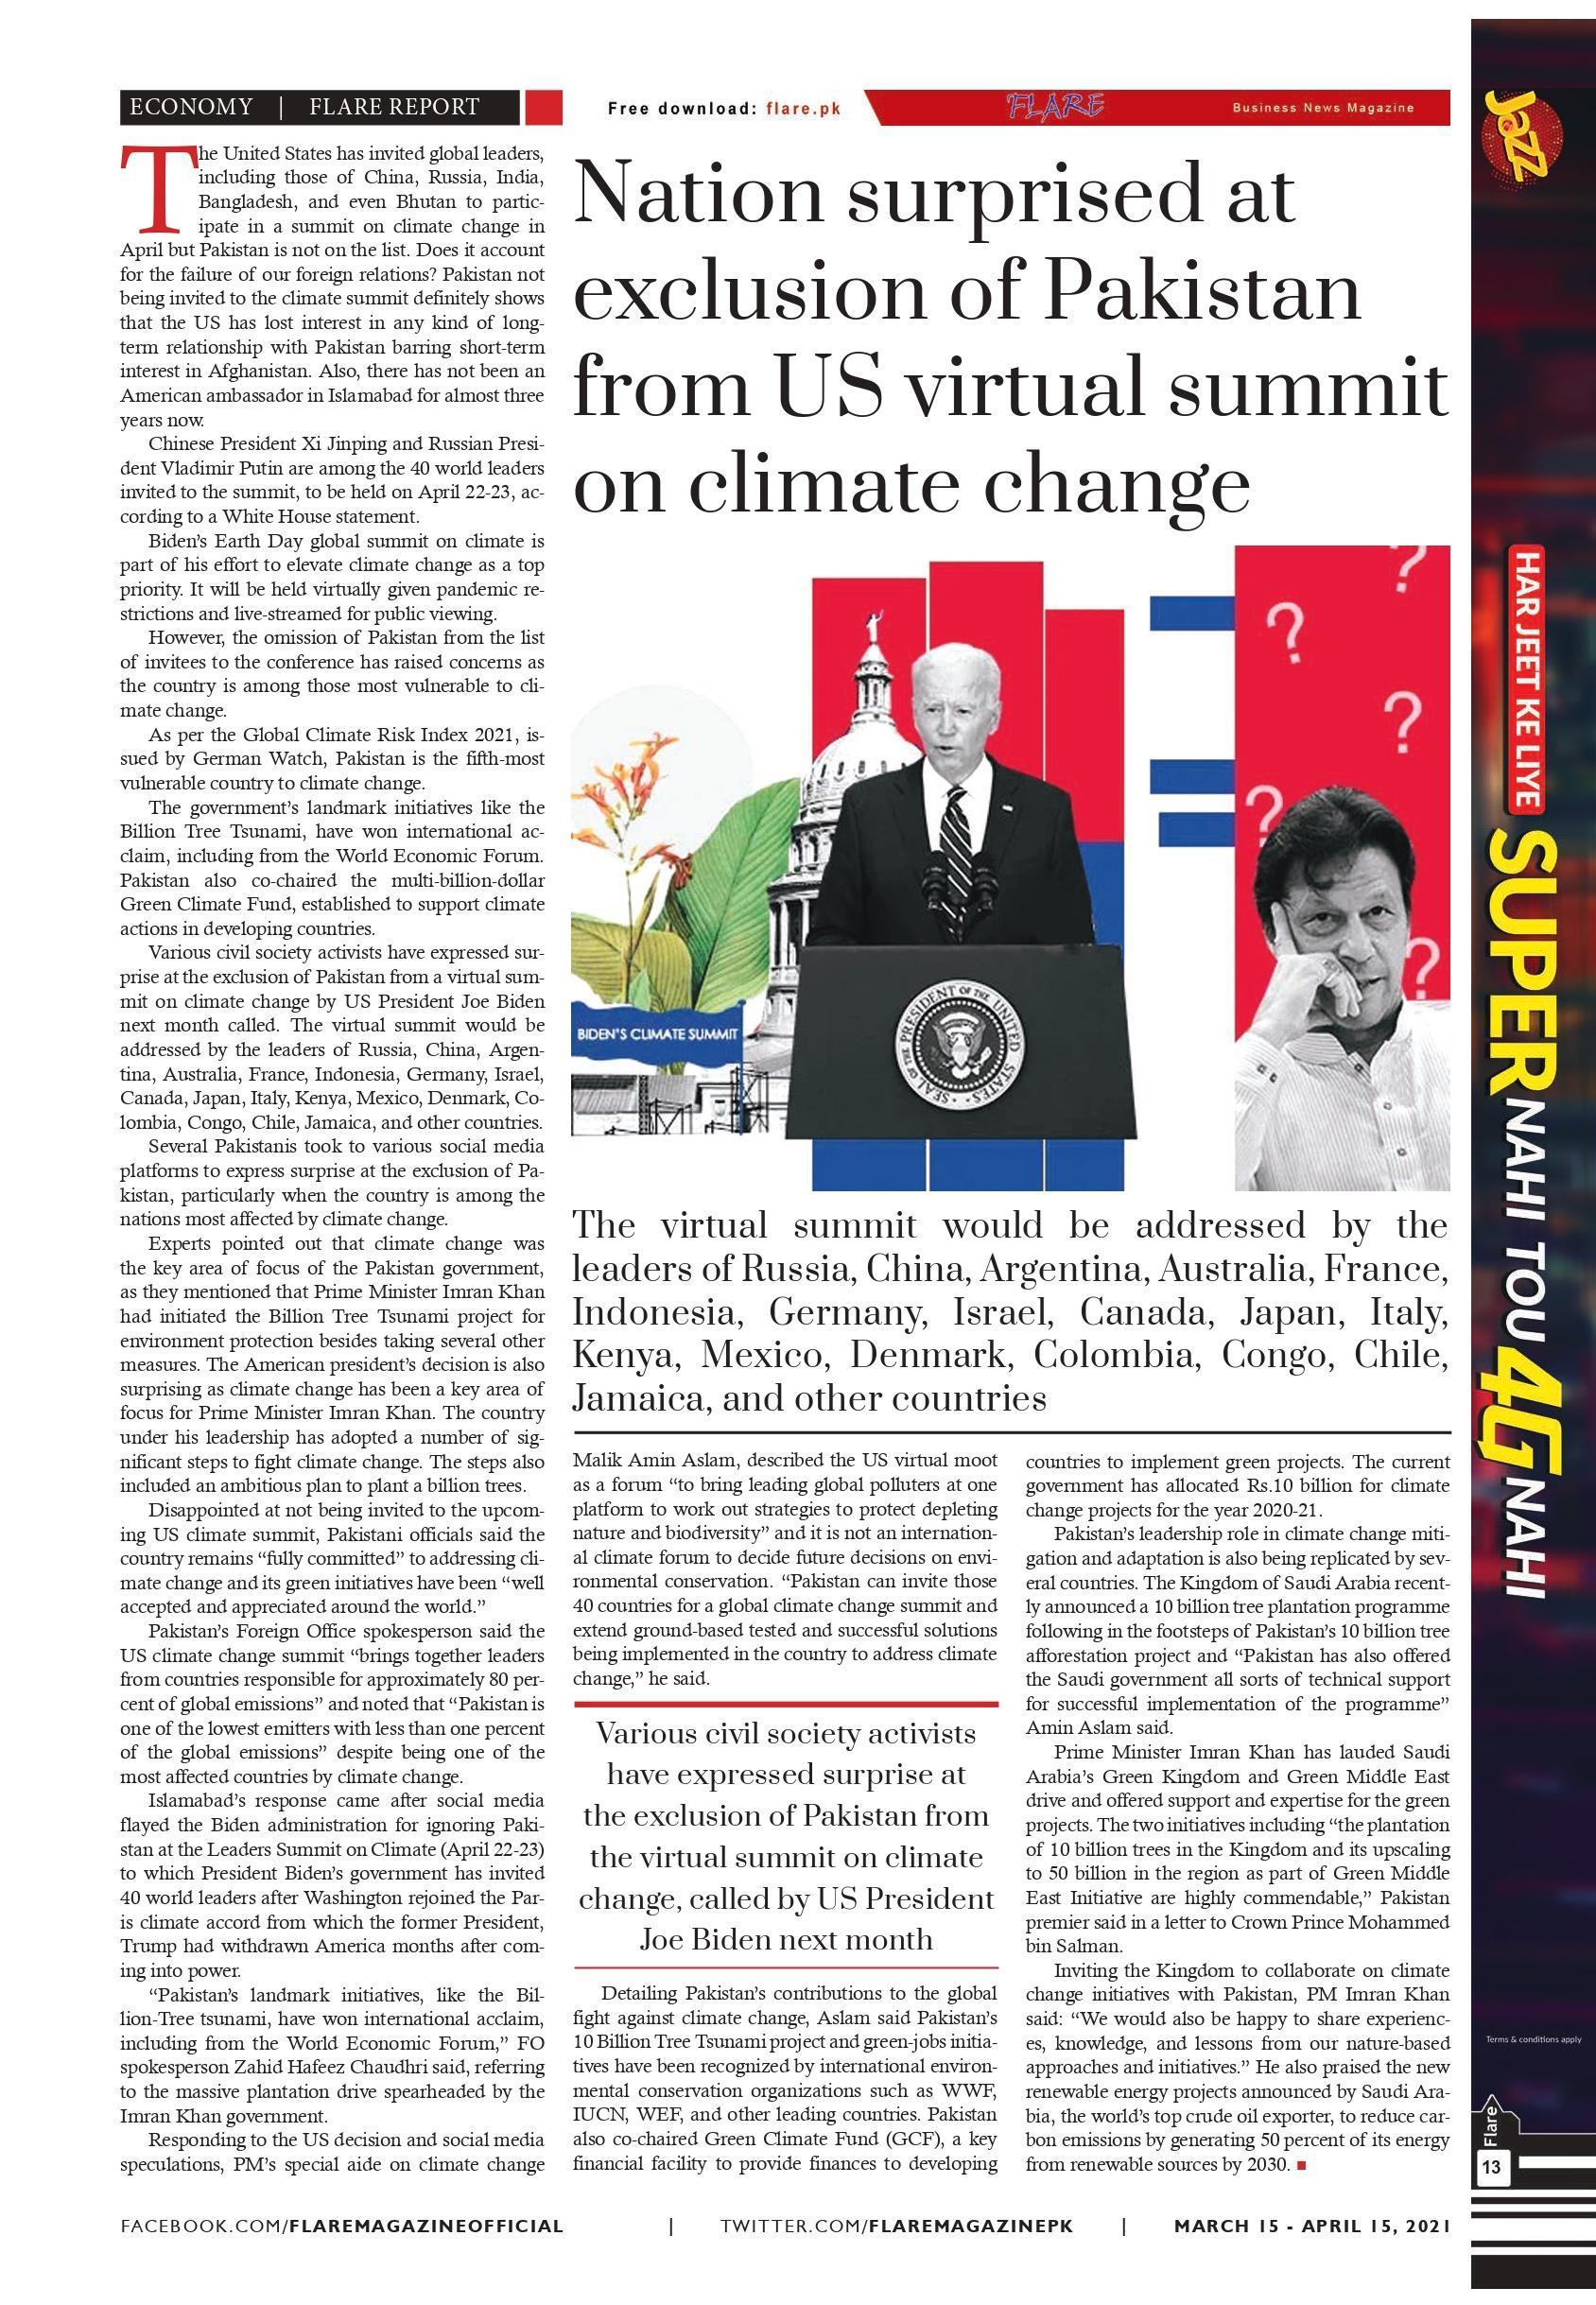 Nation surprised at exclusion of Pakistan from US virtual summit on climate change